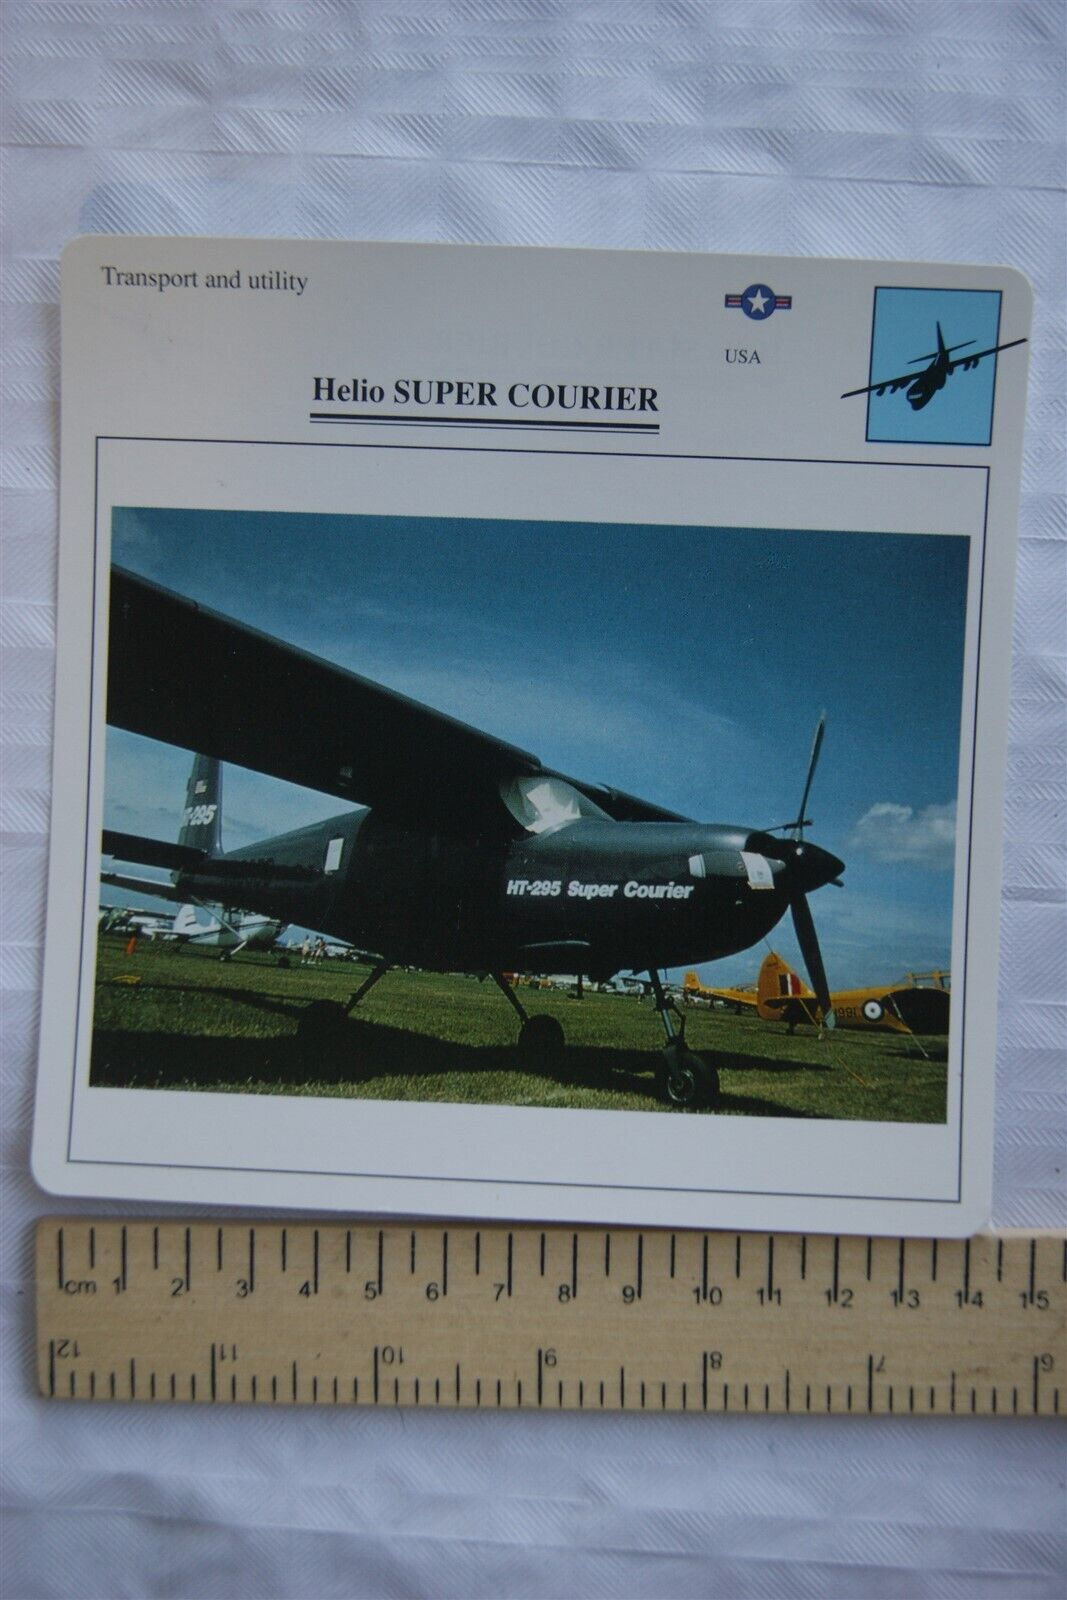 Helio Super Courier - USA - Transport & Utility - Collectors Club Card